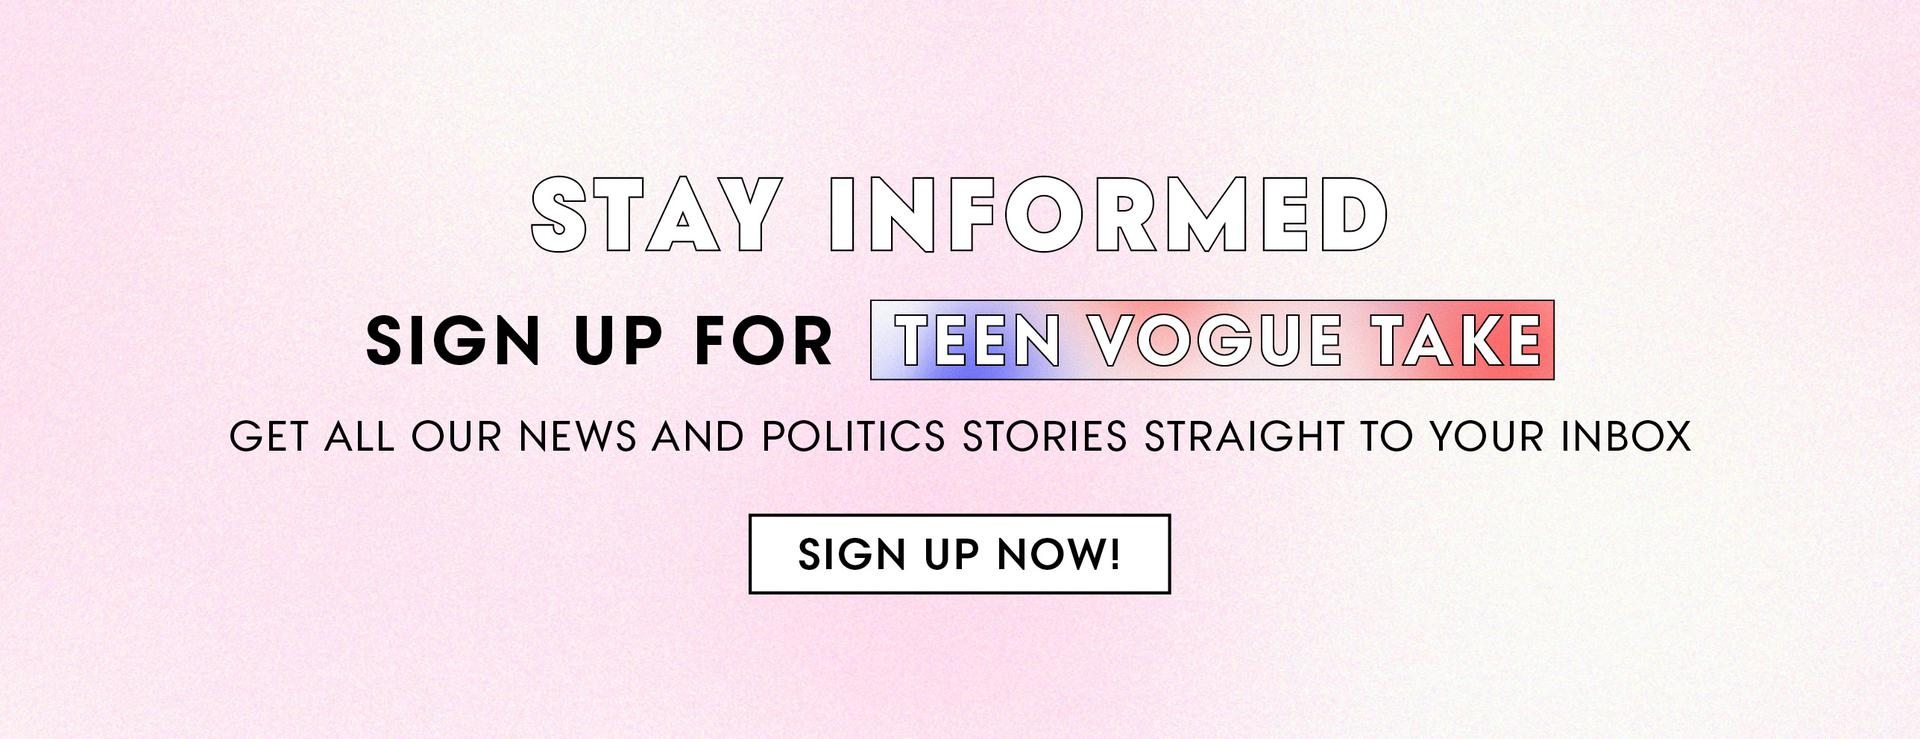 (image) Stay Informed. Sign Up for Teen Vogue Take. Get All Our News and Politics Stories Straight To Your Inbox. Sign Up Now!